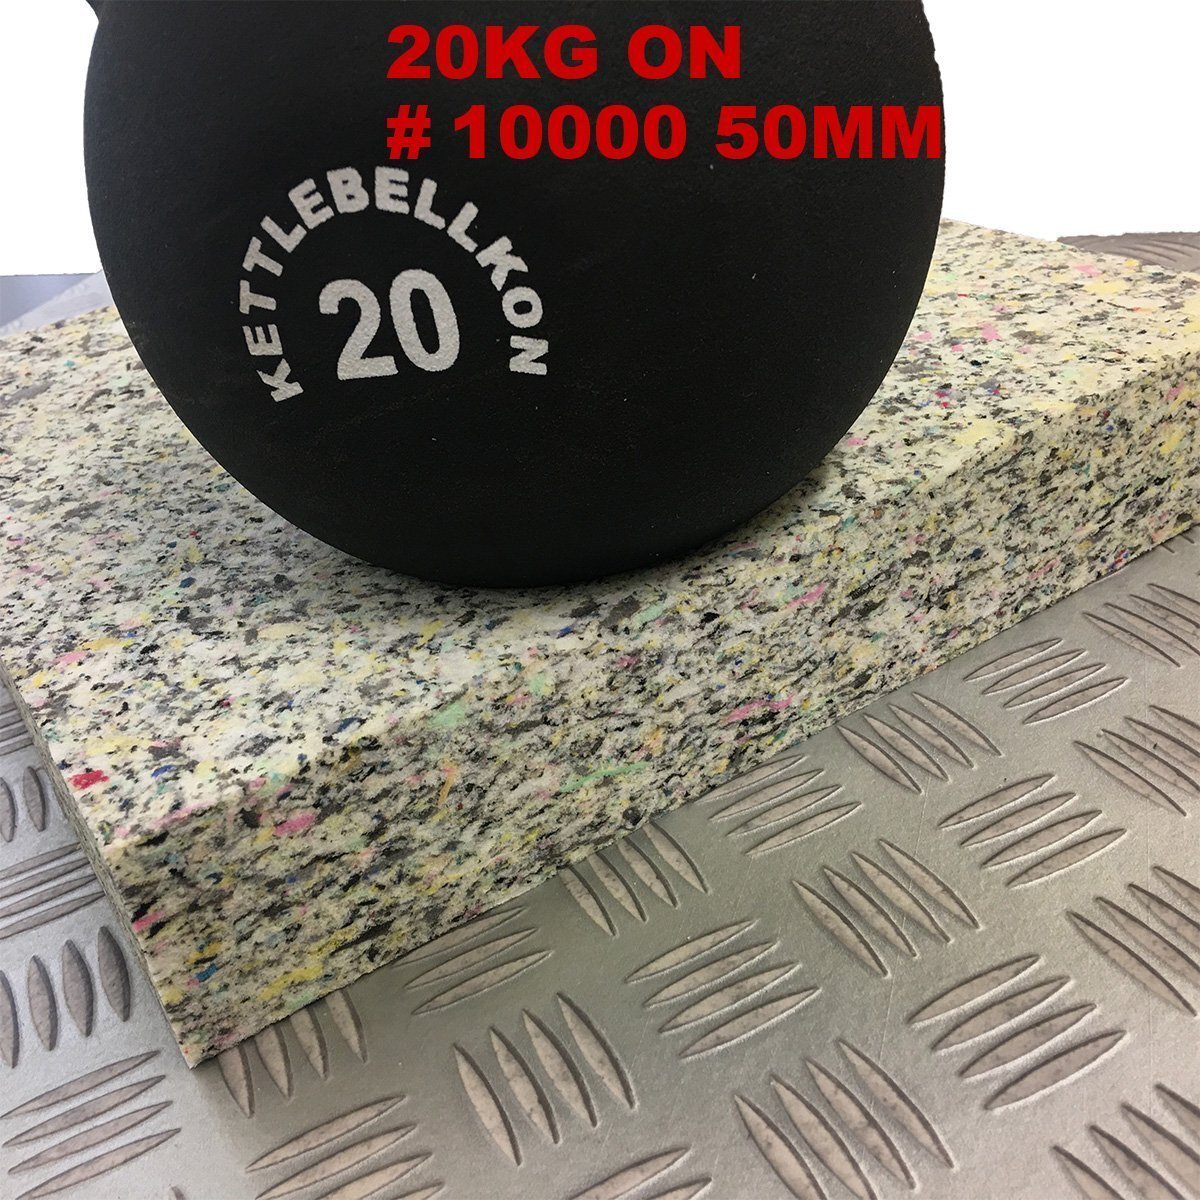  chip urethane [#10000 hardness Special .]1200x2000mm[ thickness 15mm] seat repair / sleeping area in the vehicle for bed / camper / deadning /